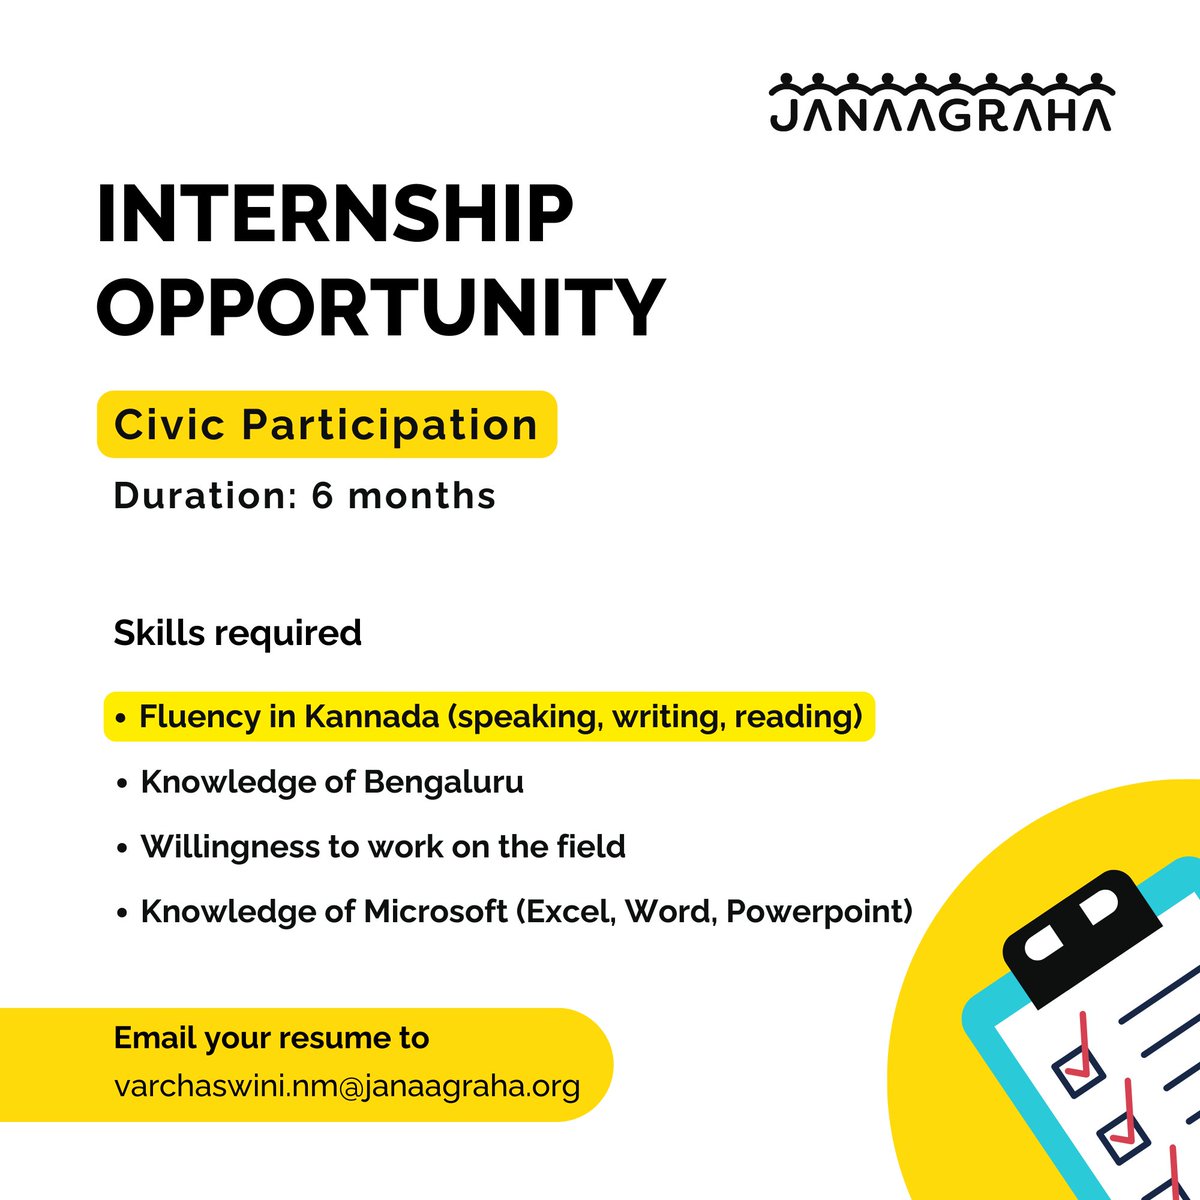 #InternshipOpportunity Are you interested in #CivicParticipation, #UrbanGovernance, and enhancing the quality of life in Indian cities? We have an opportunity in #Bengaluru that might be of interest to you! Please send your #resume to varchaswini.nm@janaagraha.org